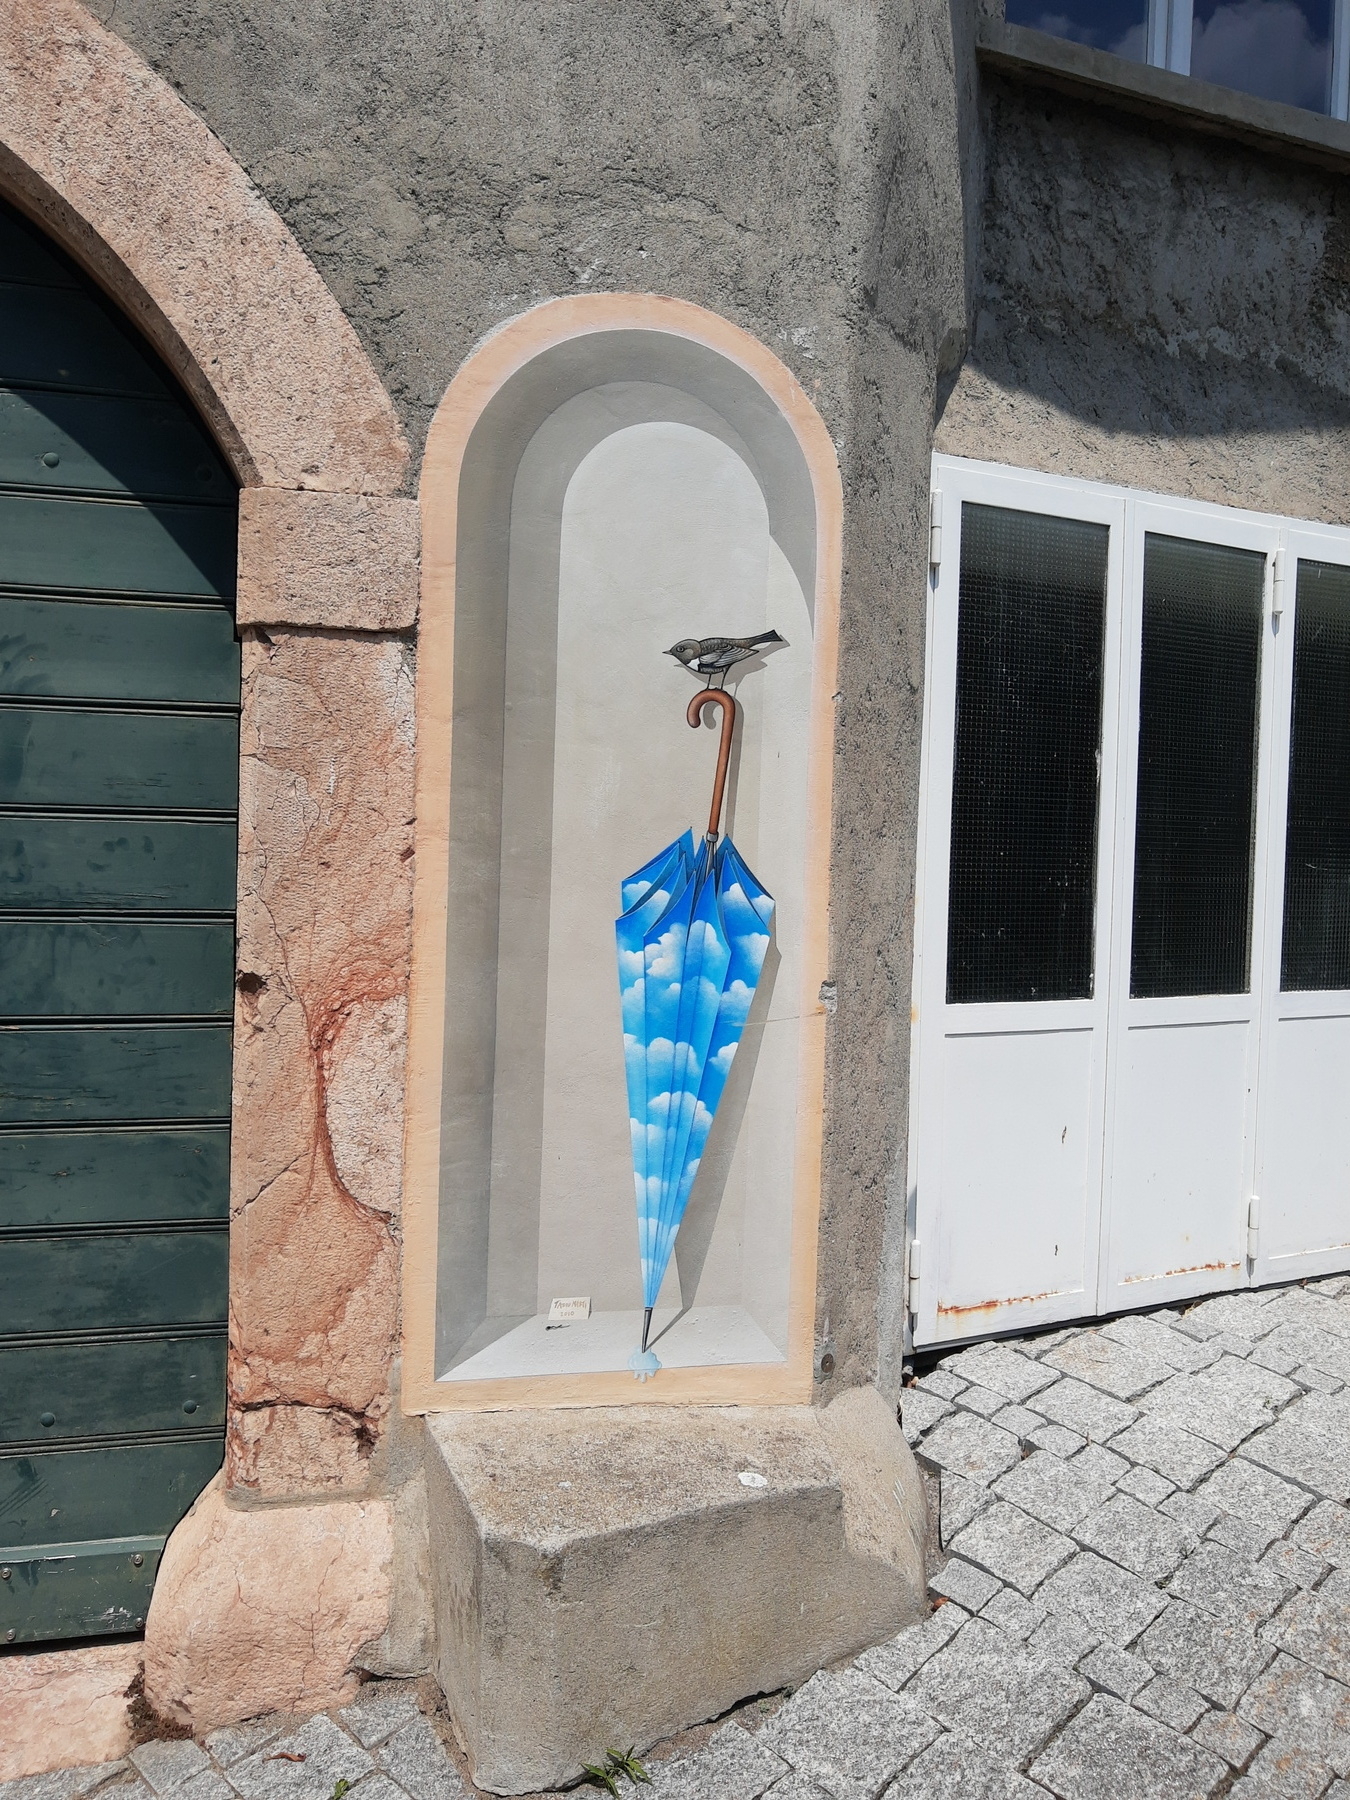 A paint on a wall showing a grey bird on a closed blu umbrella